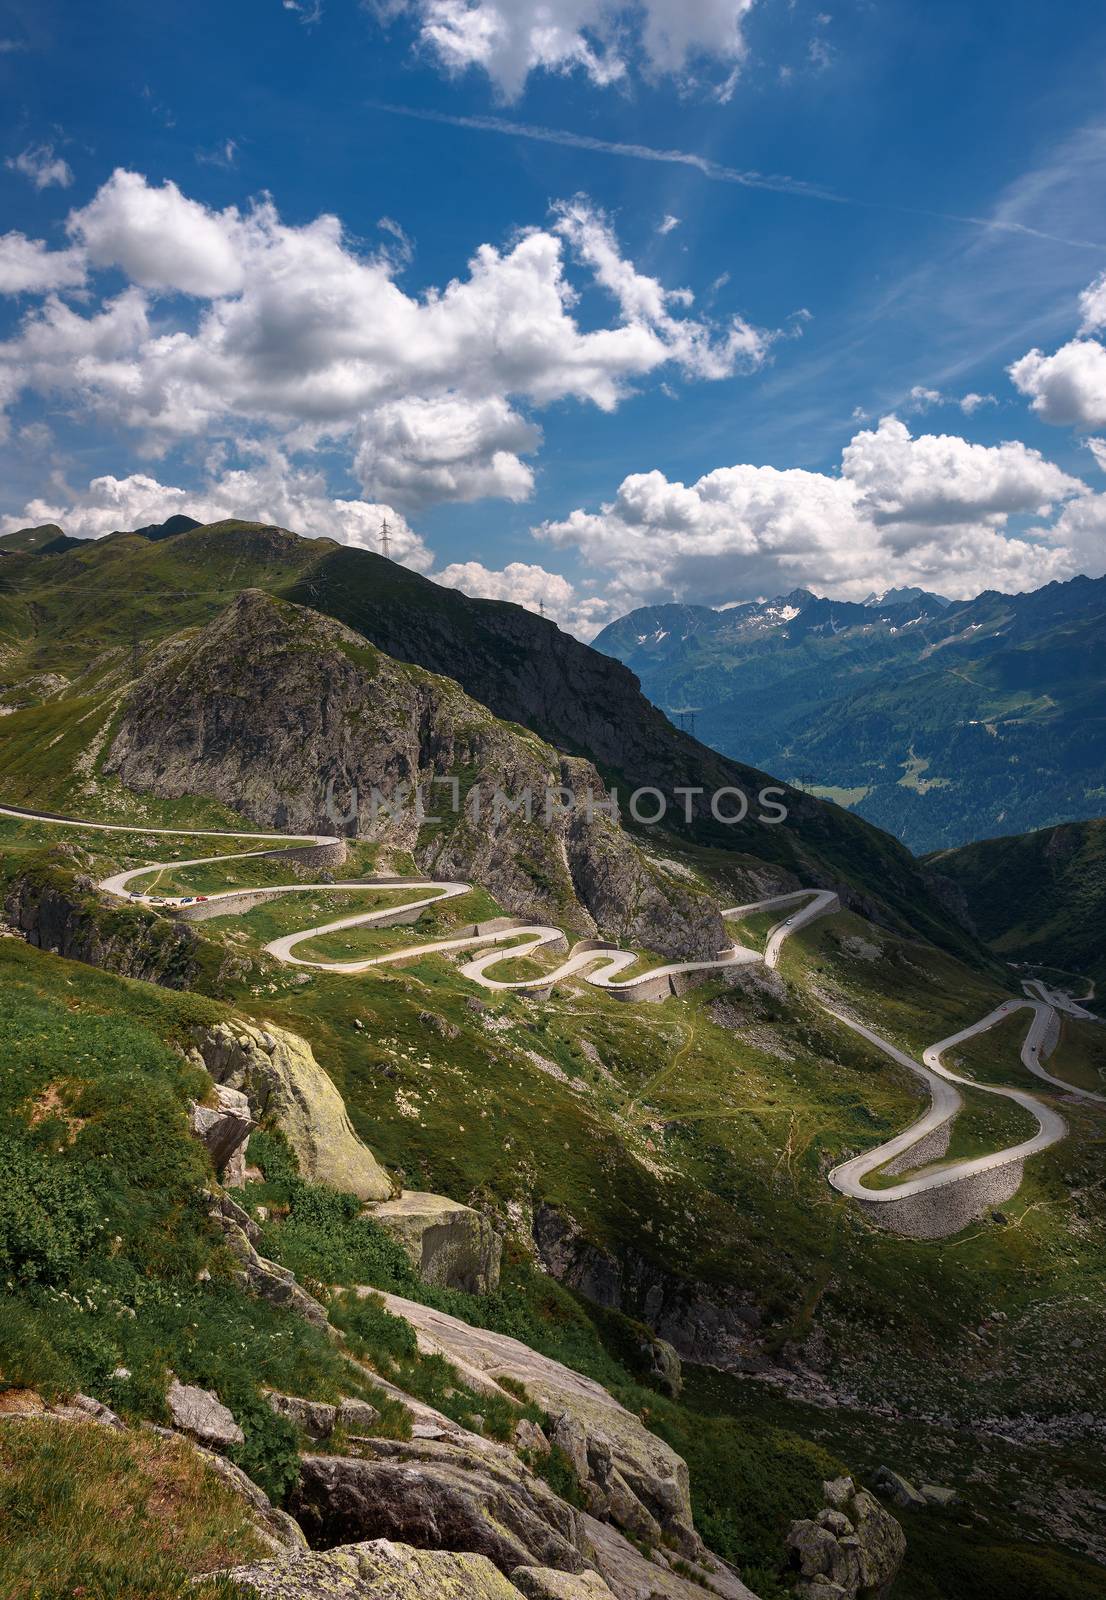 Aerial view of an old road going through the St. Gotthard pass in the Swiss Alps by nickfox